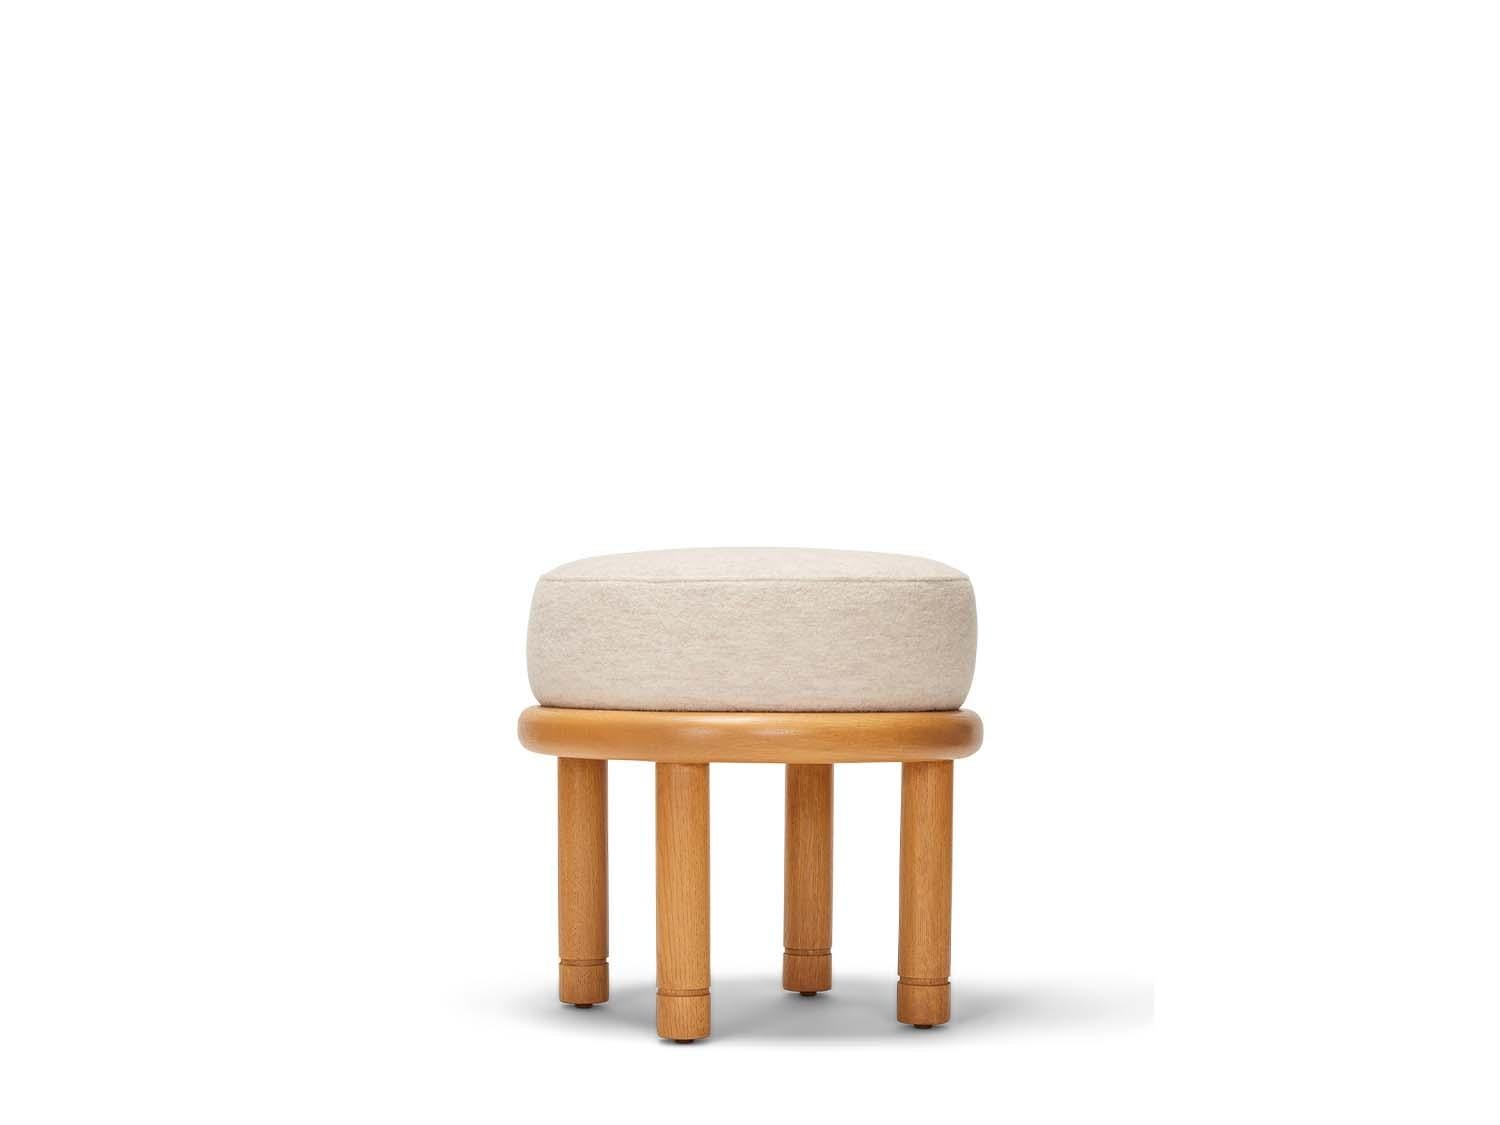 The Petite Moreno ottoman features a round solid wood base with four cylindrical legs and an upholstered top. Available in American walnut or white oak. 

The Lawson-Fenning Collection is designed and handmade in Los Angeles, California. Reach out